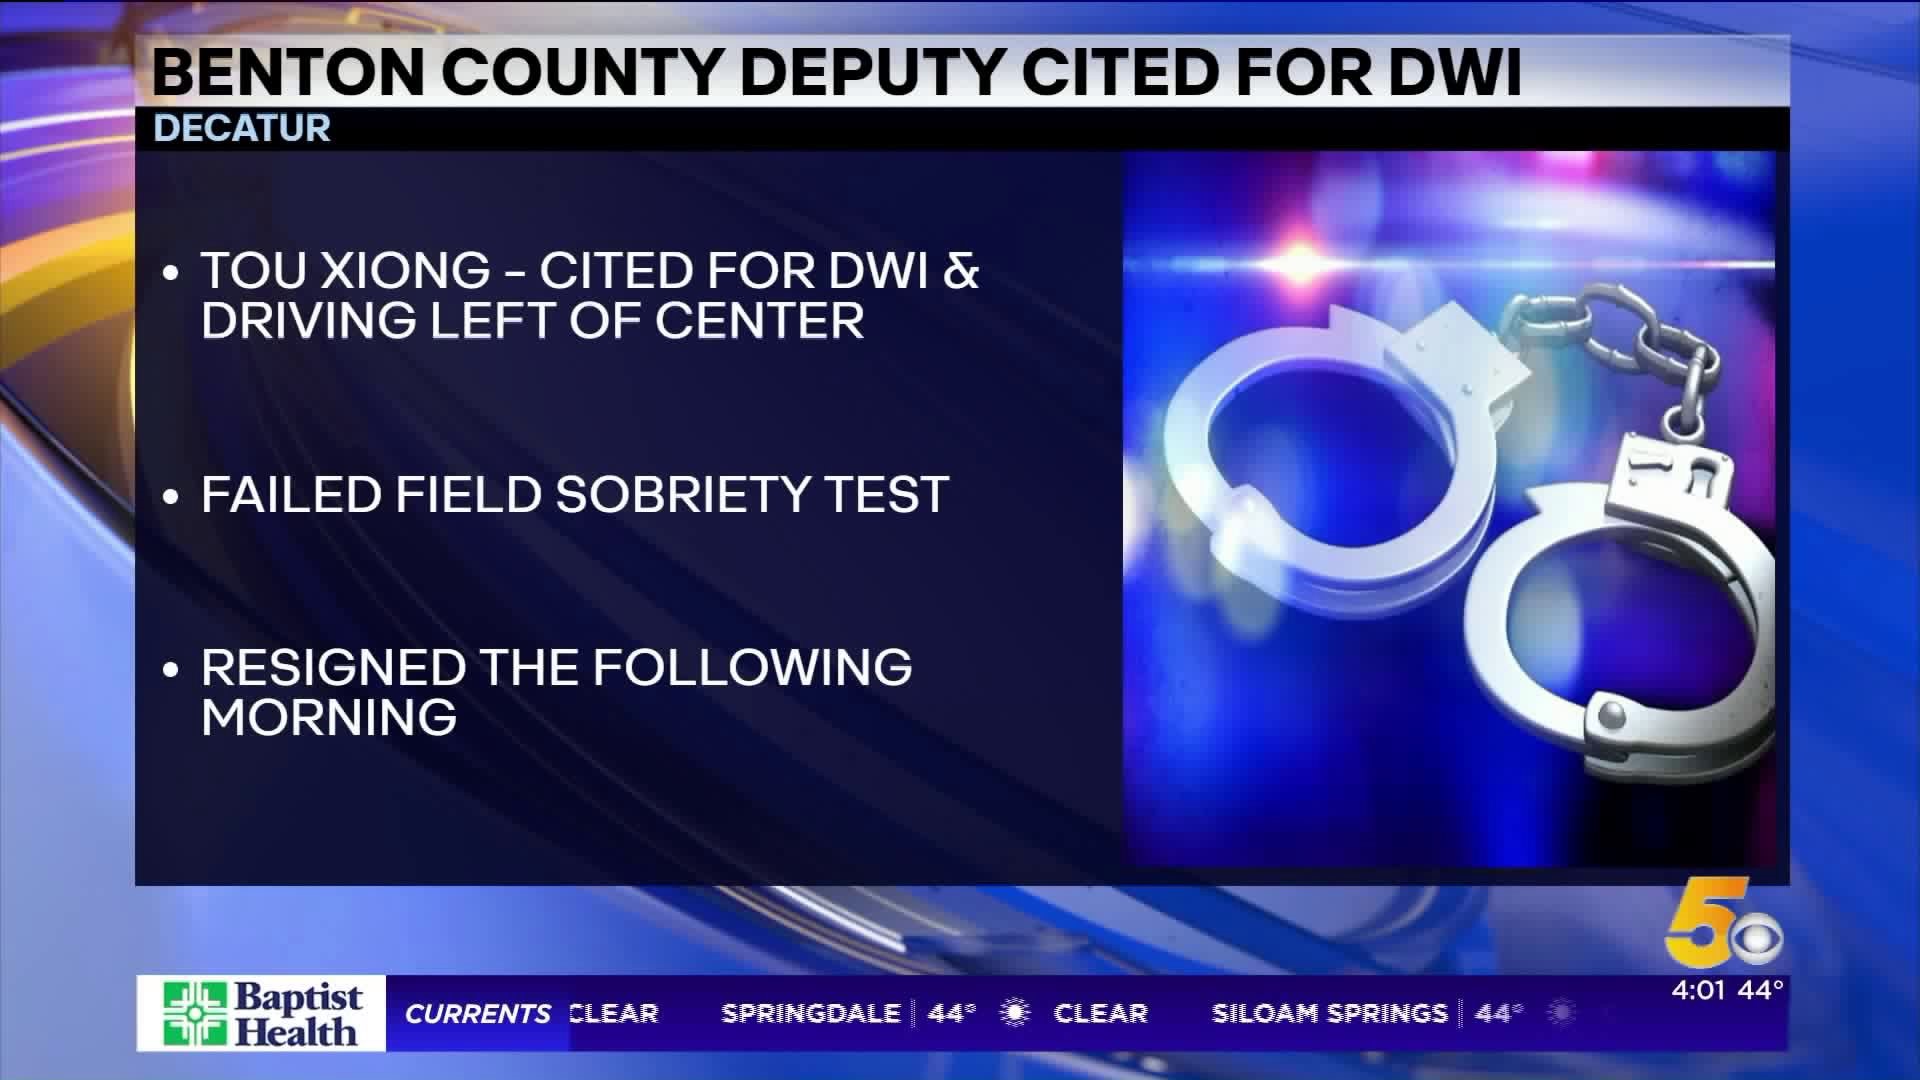 Benton County Deputy Cited for DWI